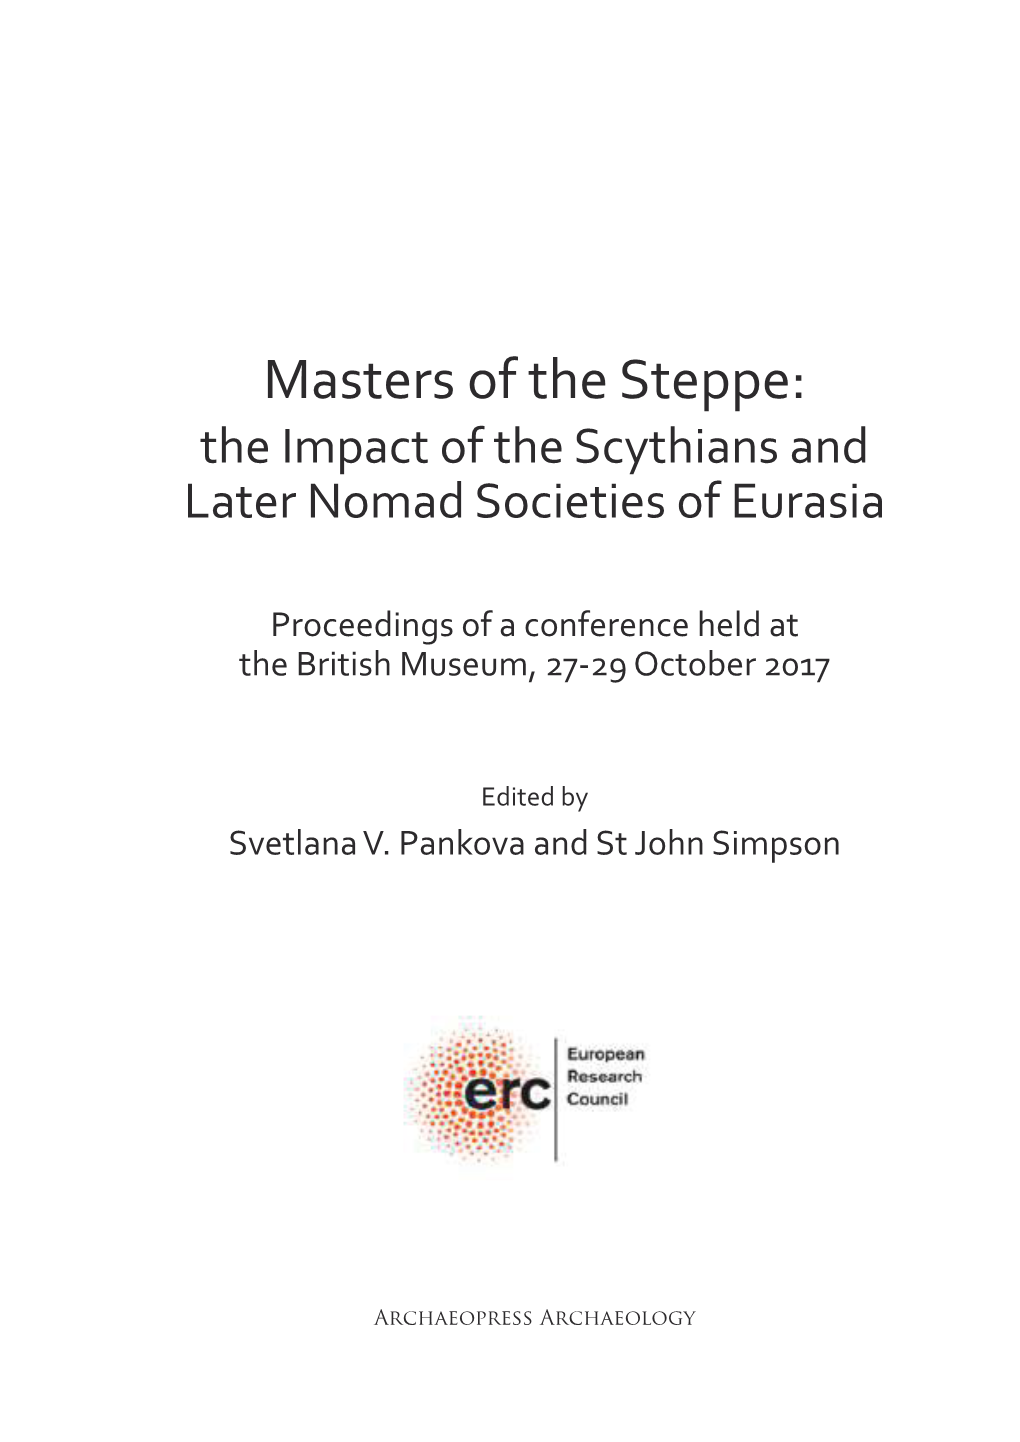 Masters of the Steppe: the Impact of the Scythians and Later Nomad Societies of Eurasia